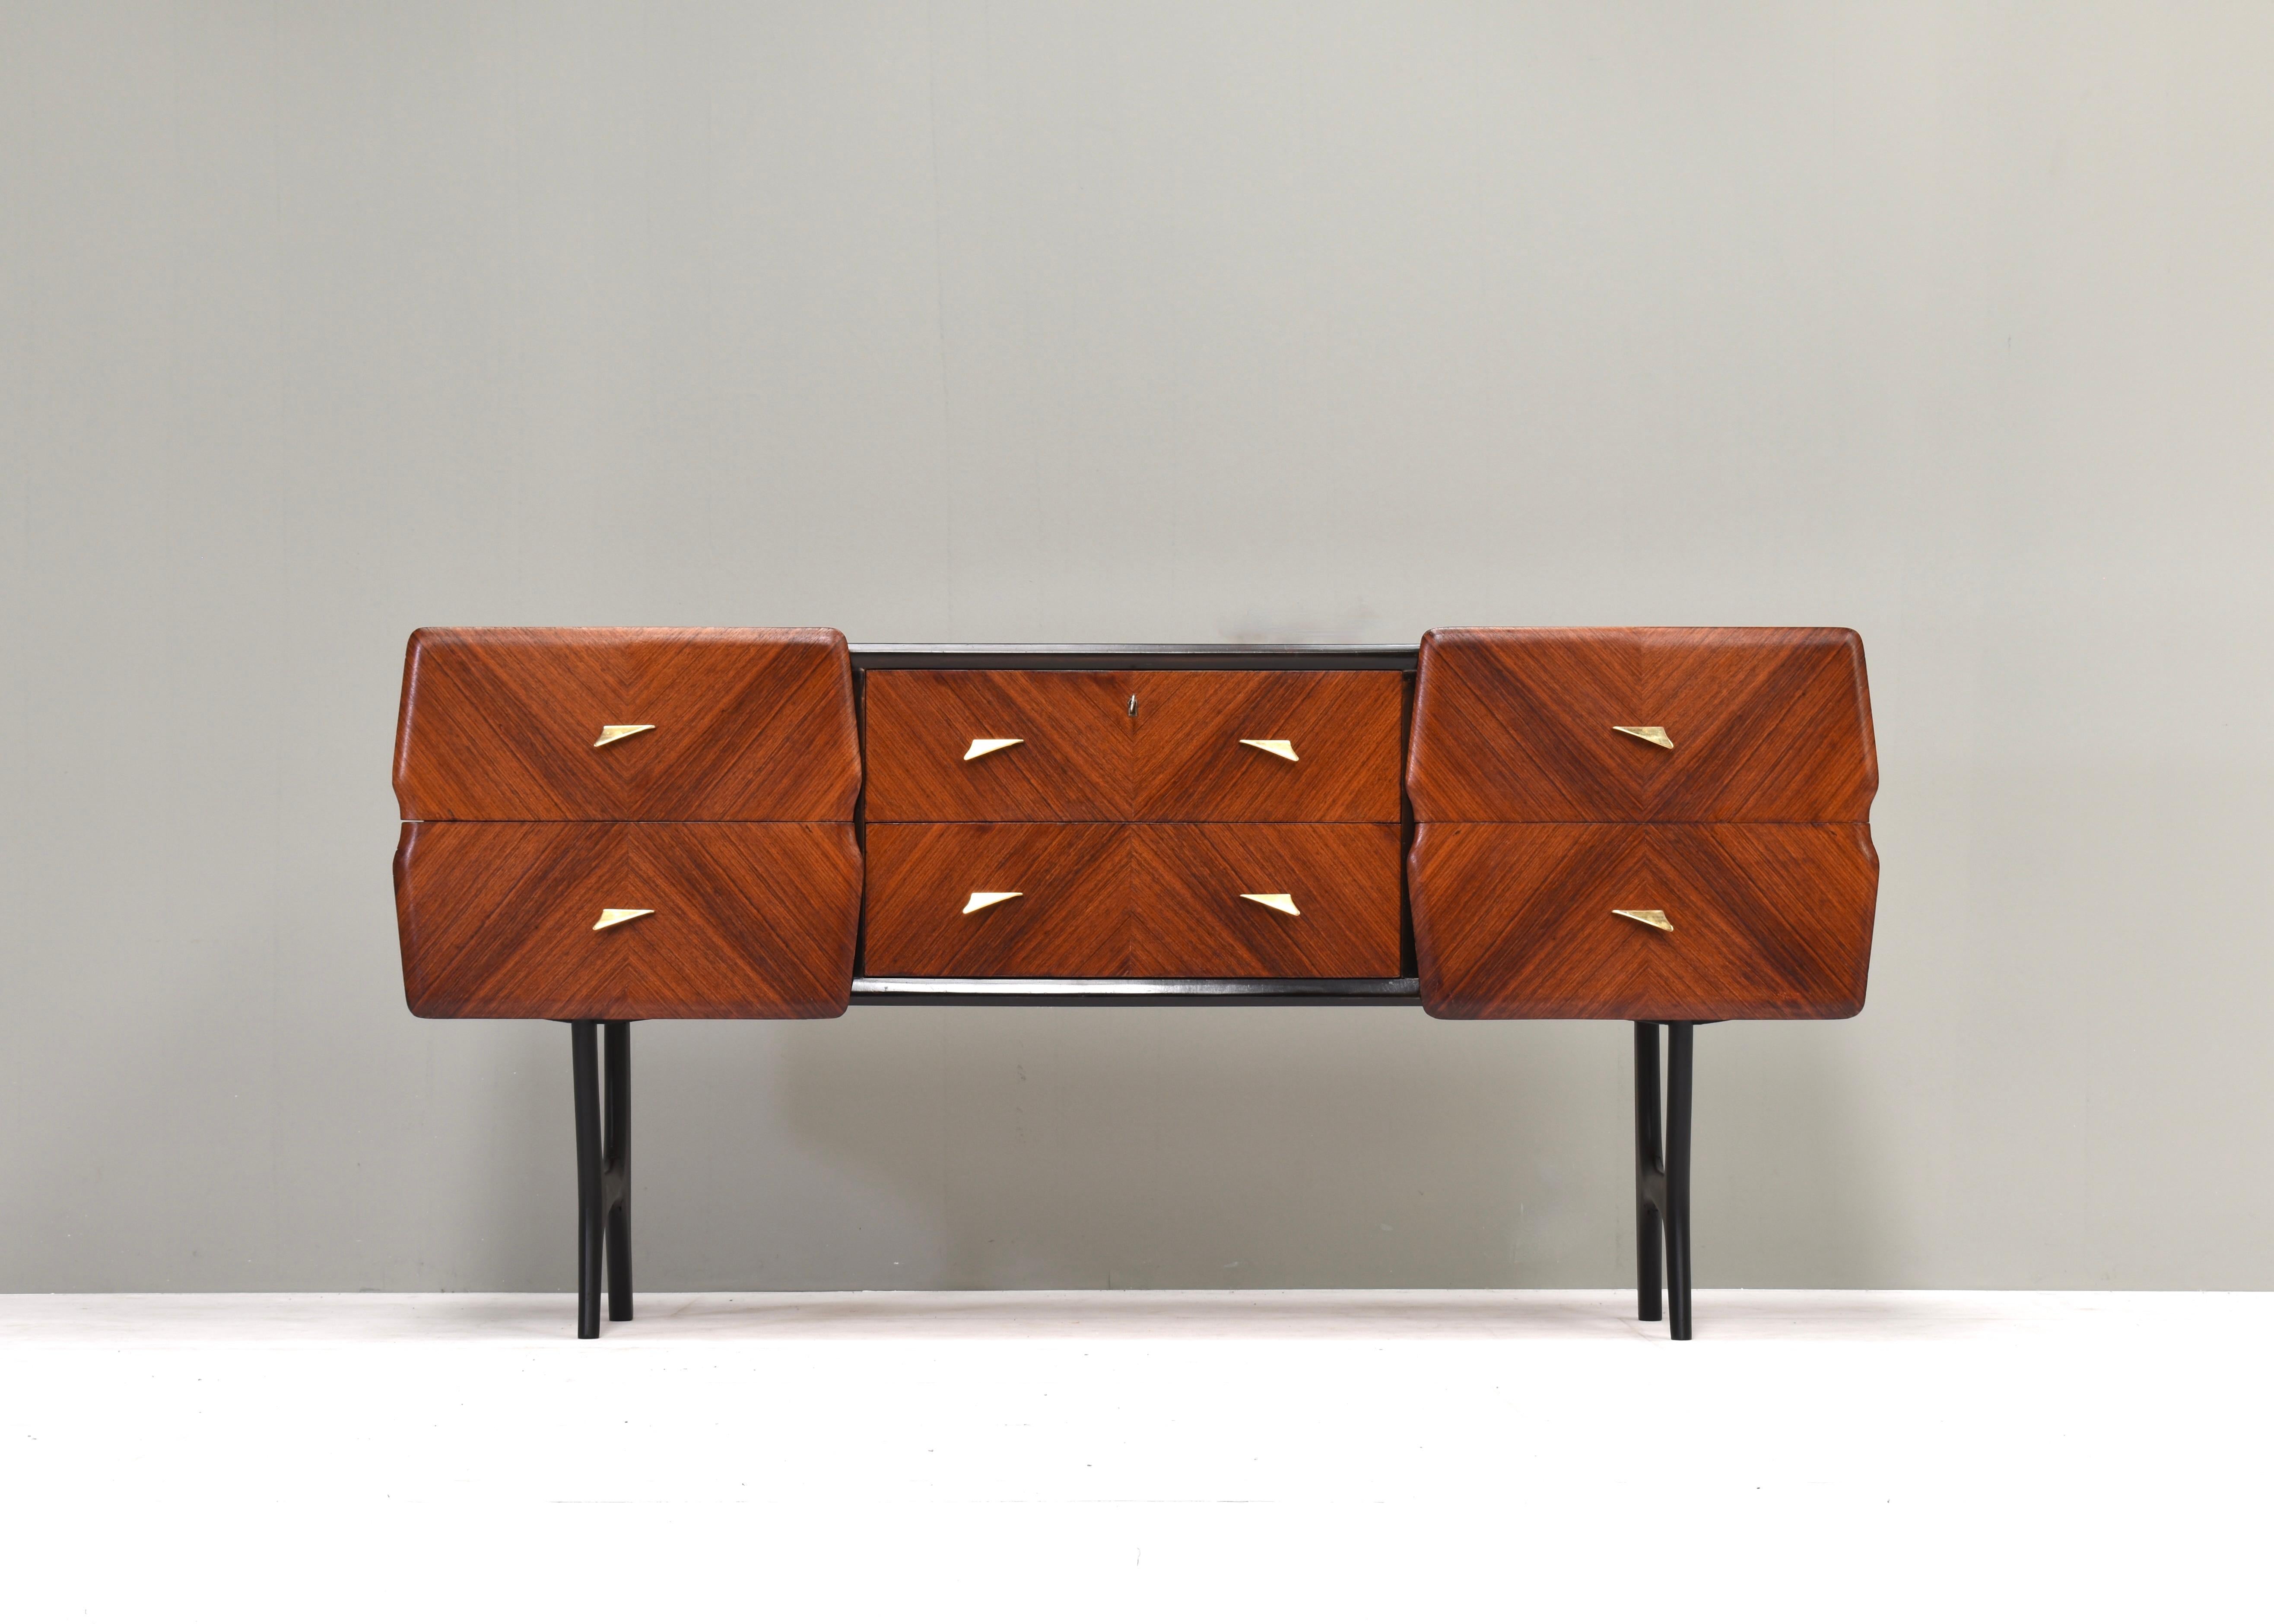 Sophisticated Italian walnut credenza by or in the style of Vittorio Dassi, Italy – circa 1950.

The credenza has been beautifully handcrafted with amazing details such as mirroring mosaic veneer finishings, handmade solid brass grips and a glass